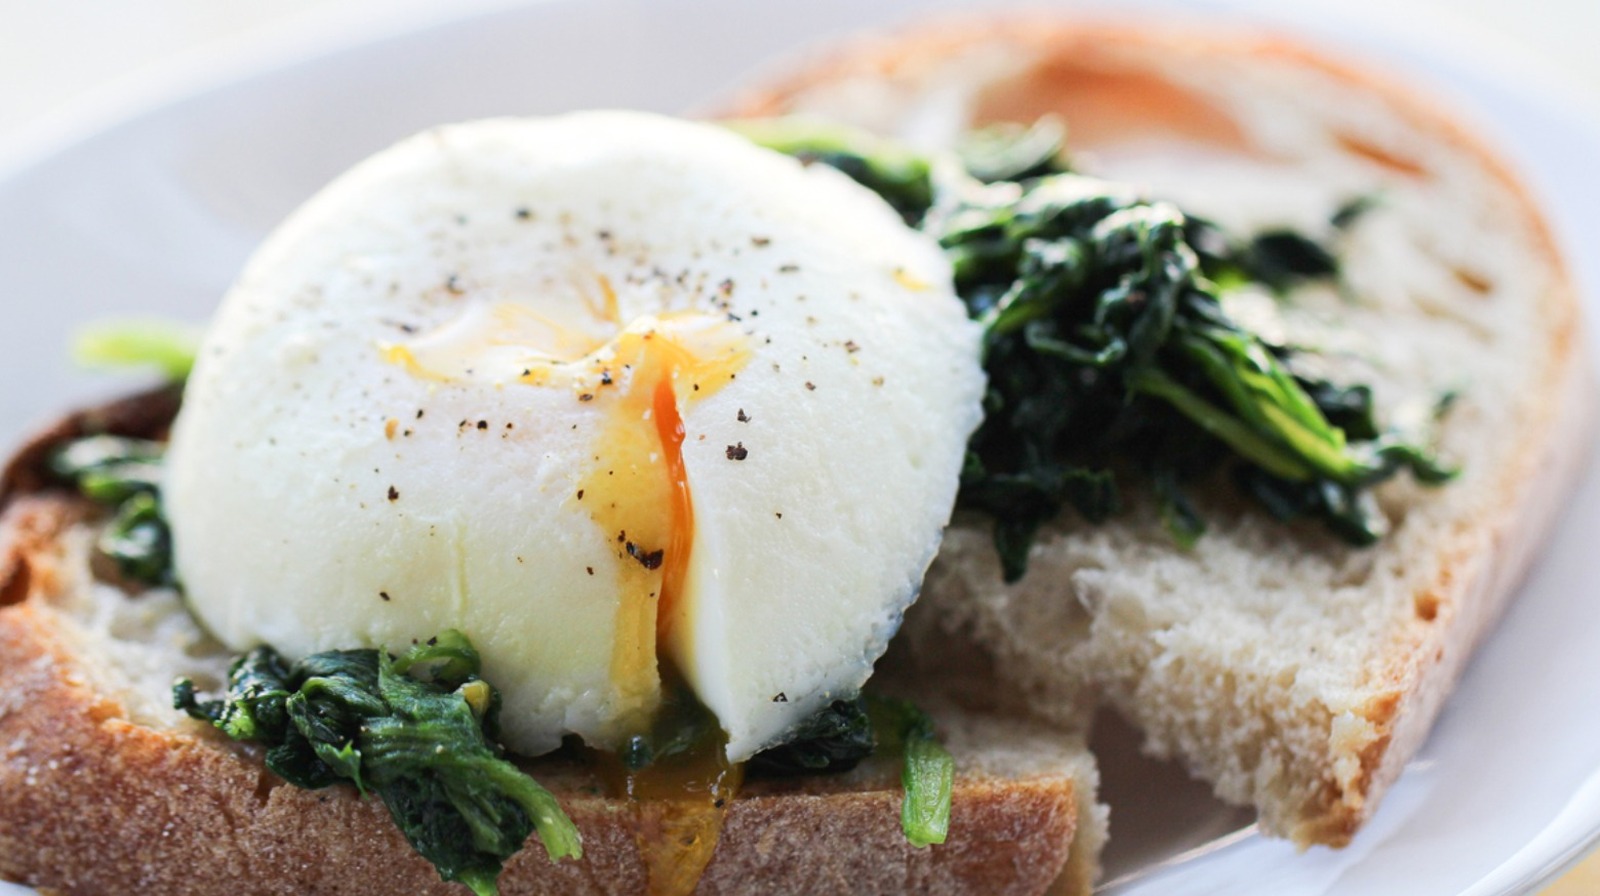 https://www.mashed.com/img/gallery/instant-pot-poached-eggs/l-intro-1618238108.jpg